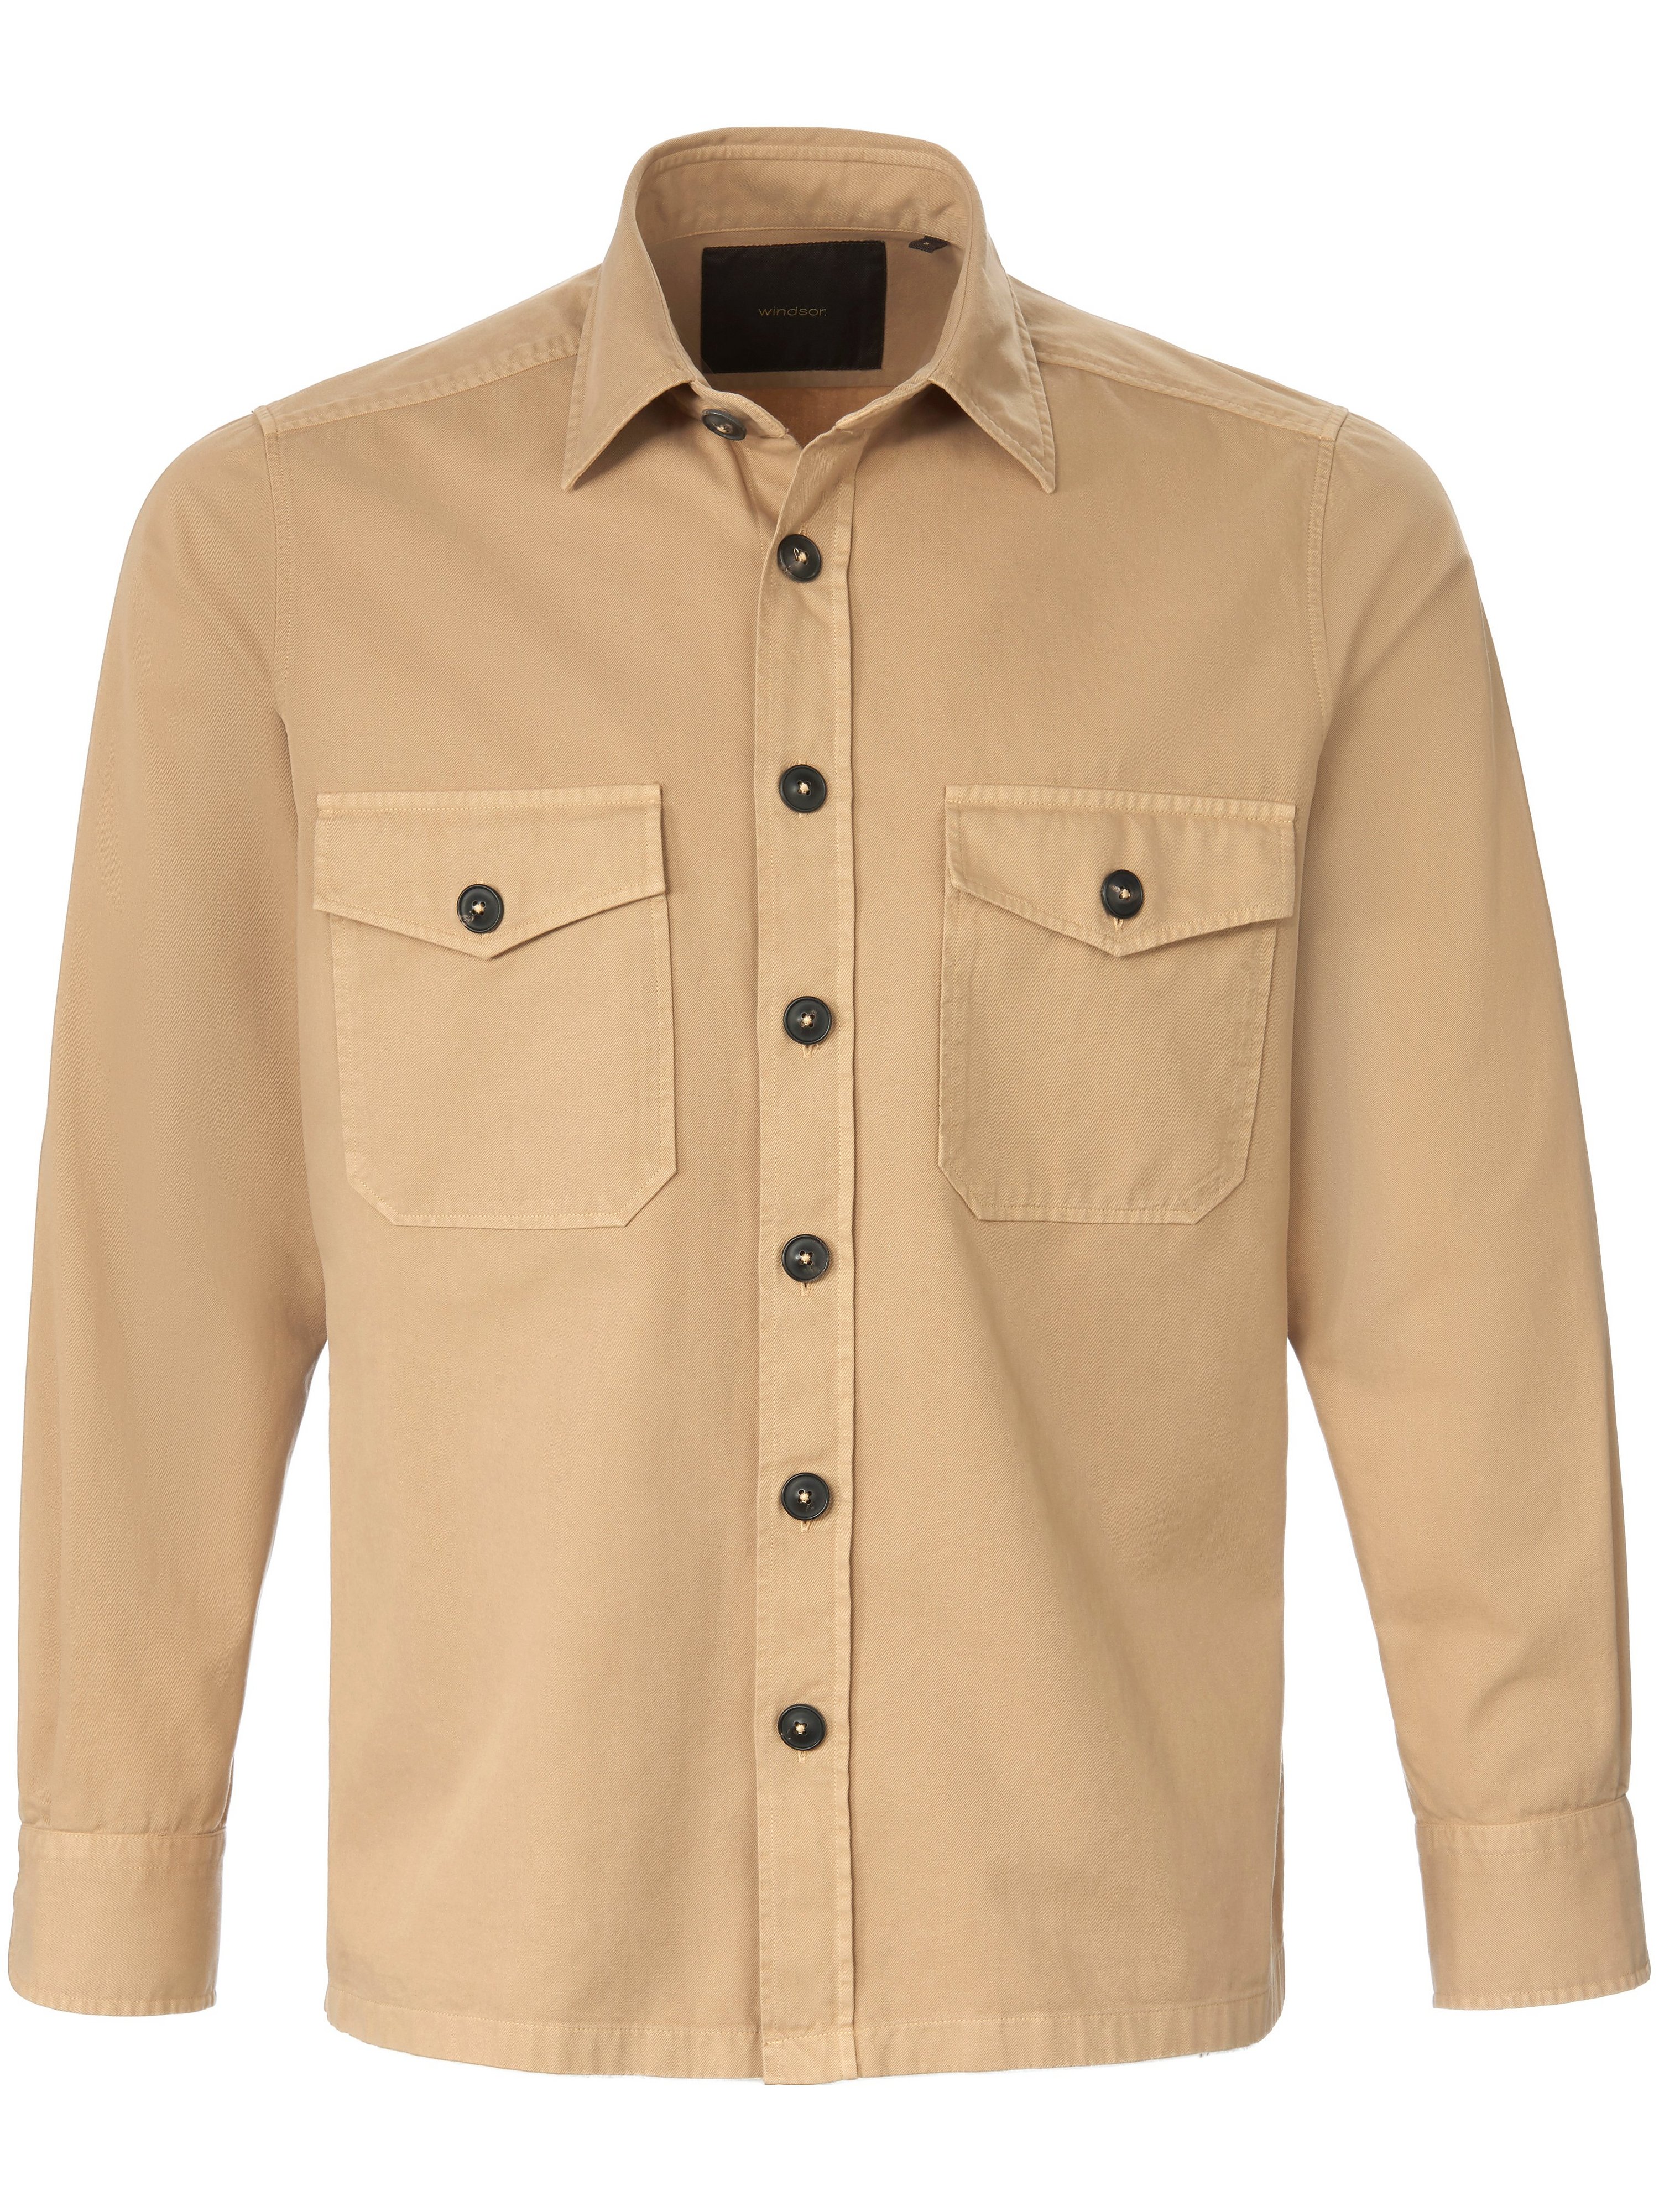 La chemise Casual Fit  Windsor beige taille 50